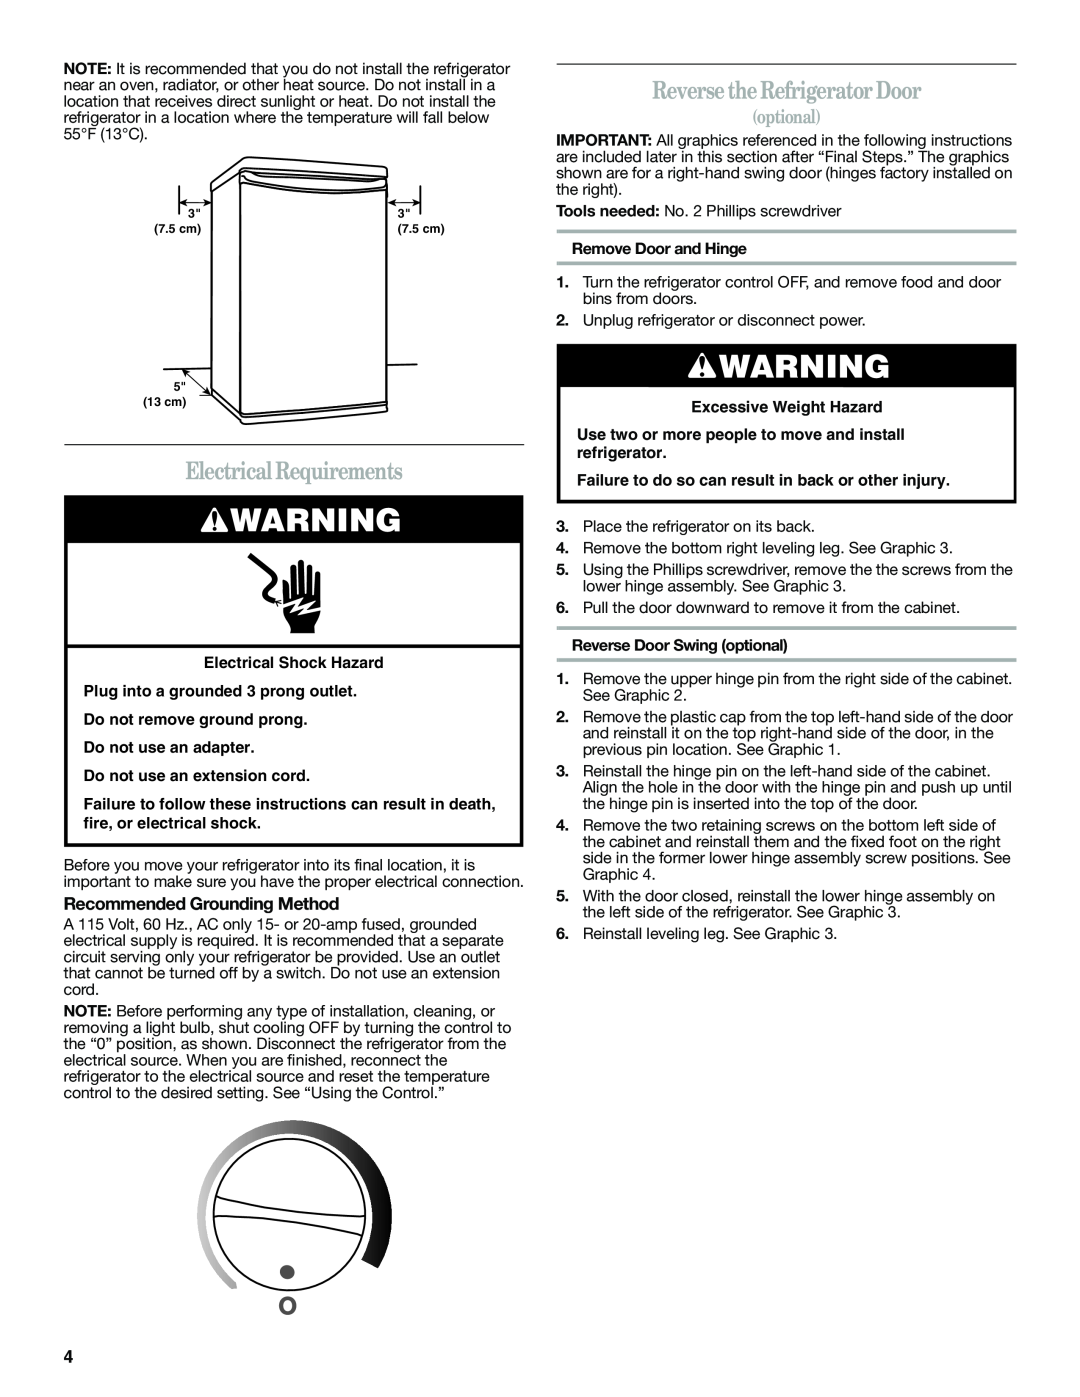 Whirlpool WAR349BSL manual Electrical Requirements, Reverse the Refrigerator Door, optional, Recommended Grounding Method 